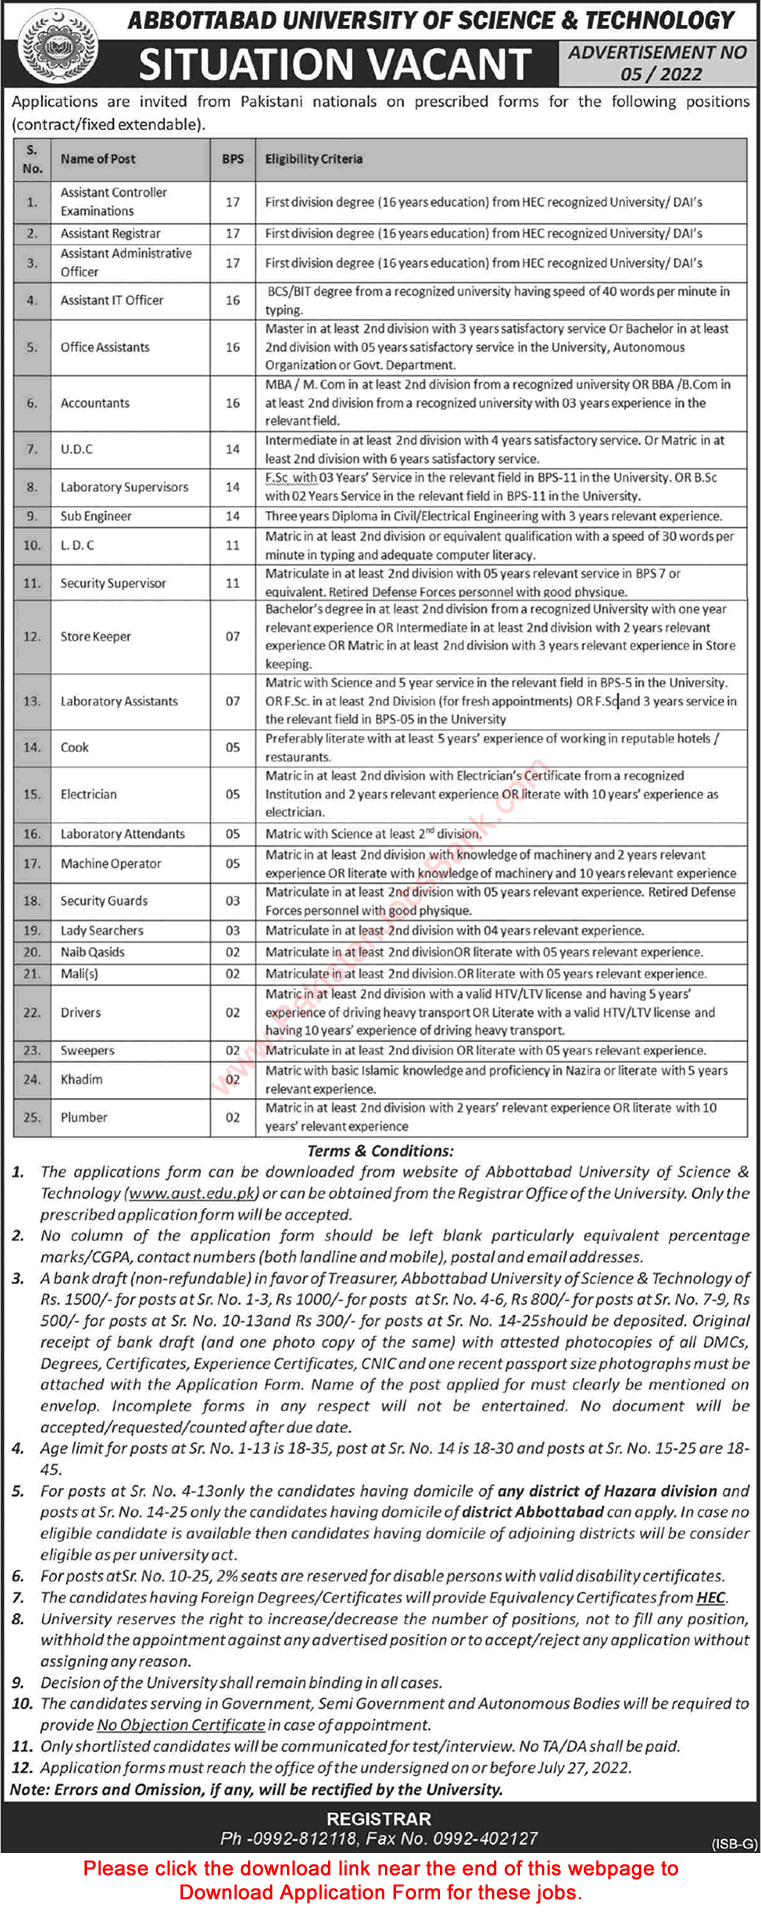 Abbottabad University of Science and Technology Jobs July 2022 Application Form Lab Assistant & Others Latest